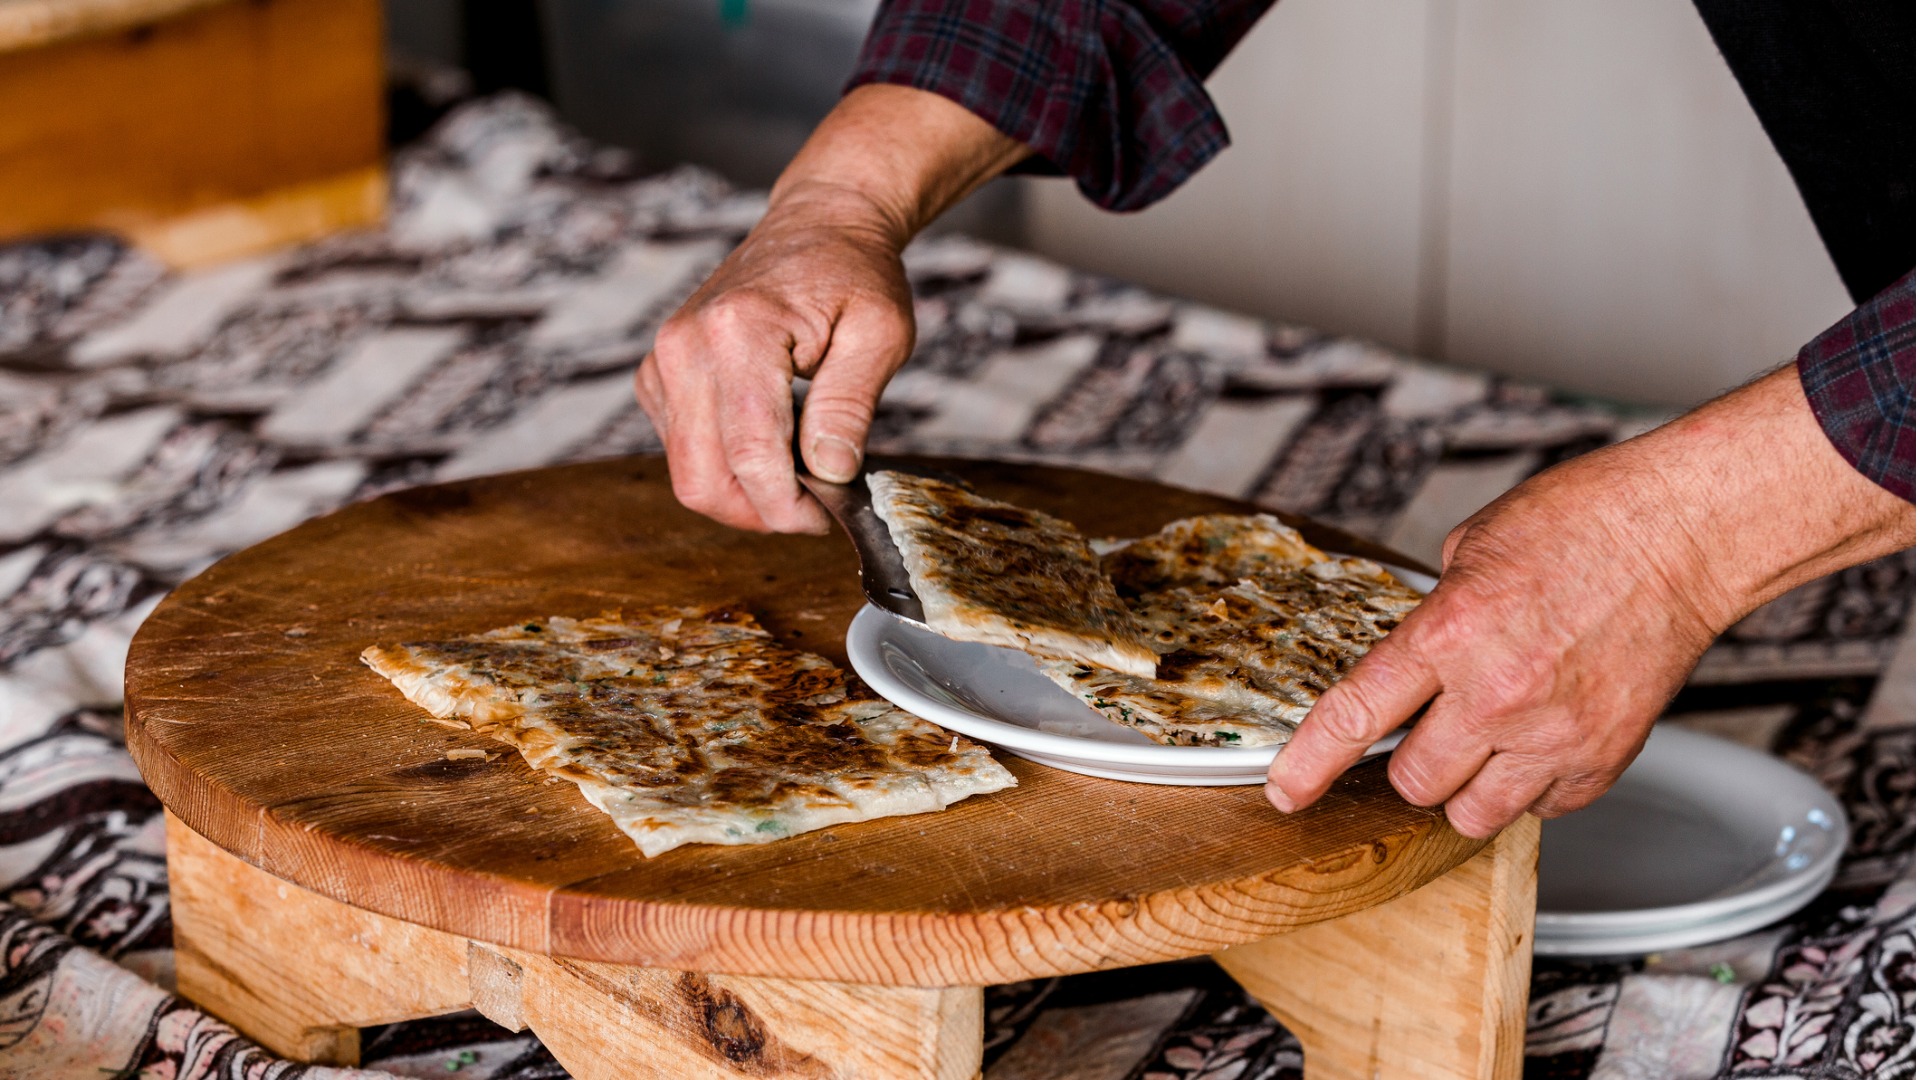 This is a close-up of two hands cutting gozleme on a wooden board and serving the pieces on a plate. 